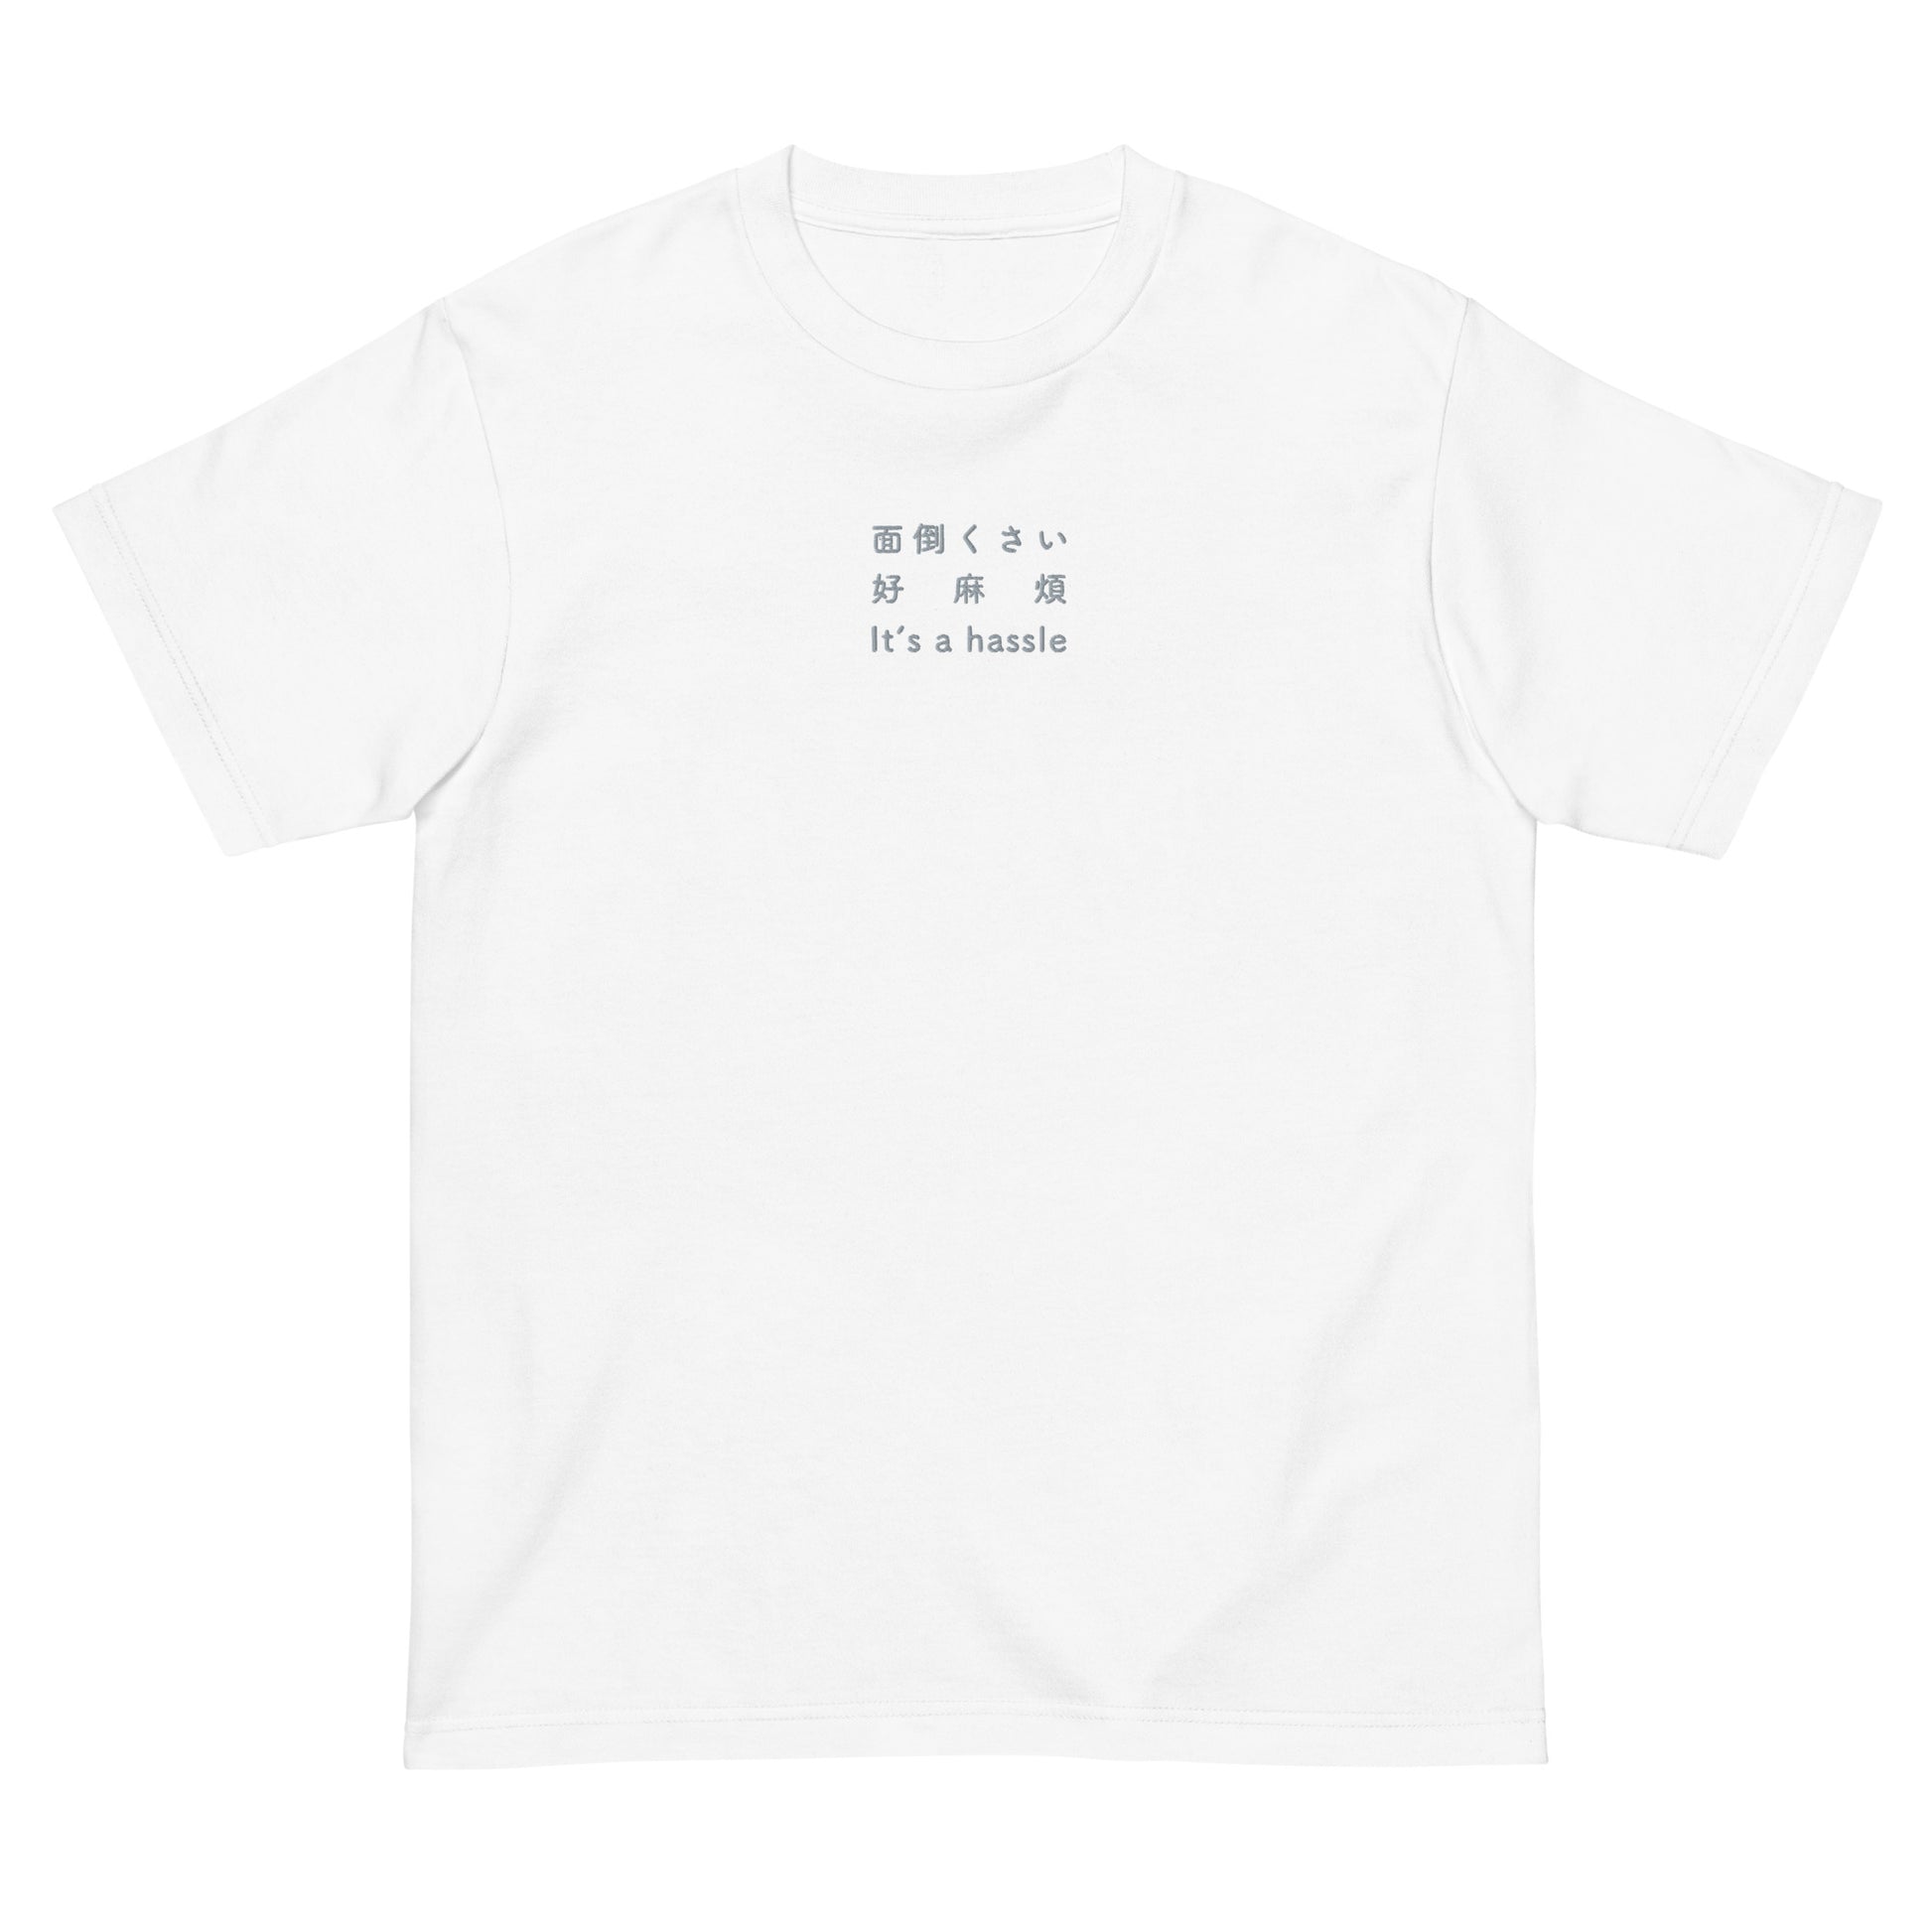 White High Quality Tee - Front Design with an Light GrayEmbroidery "It's a hassle" in Japanese,Chinese and English